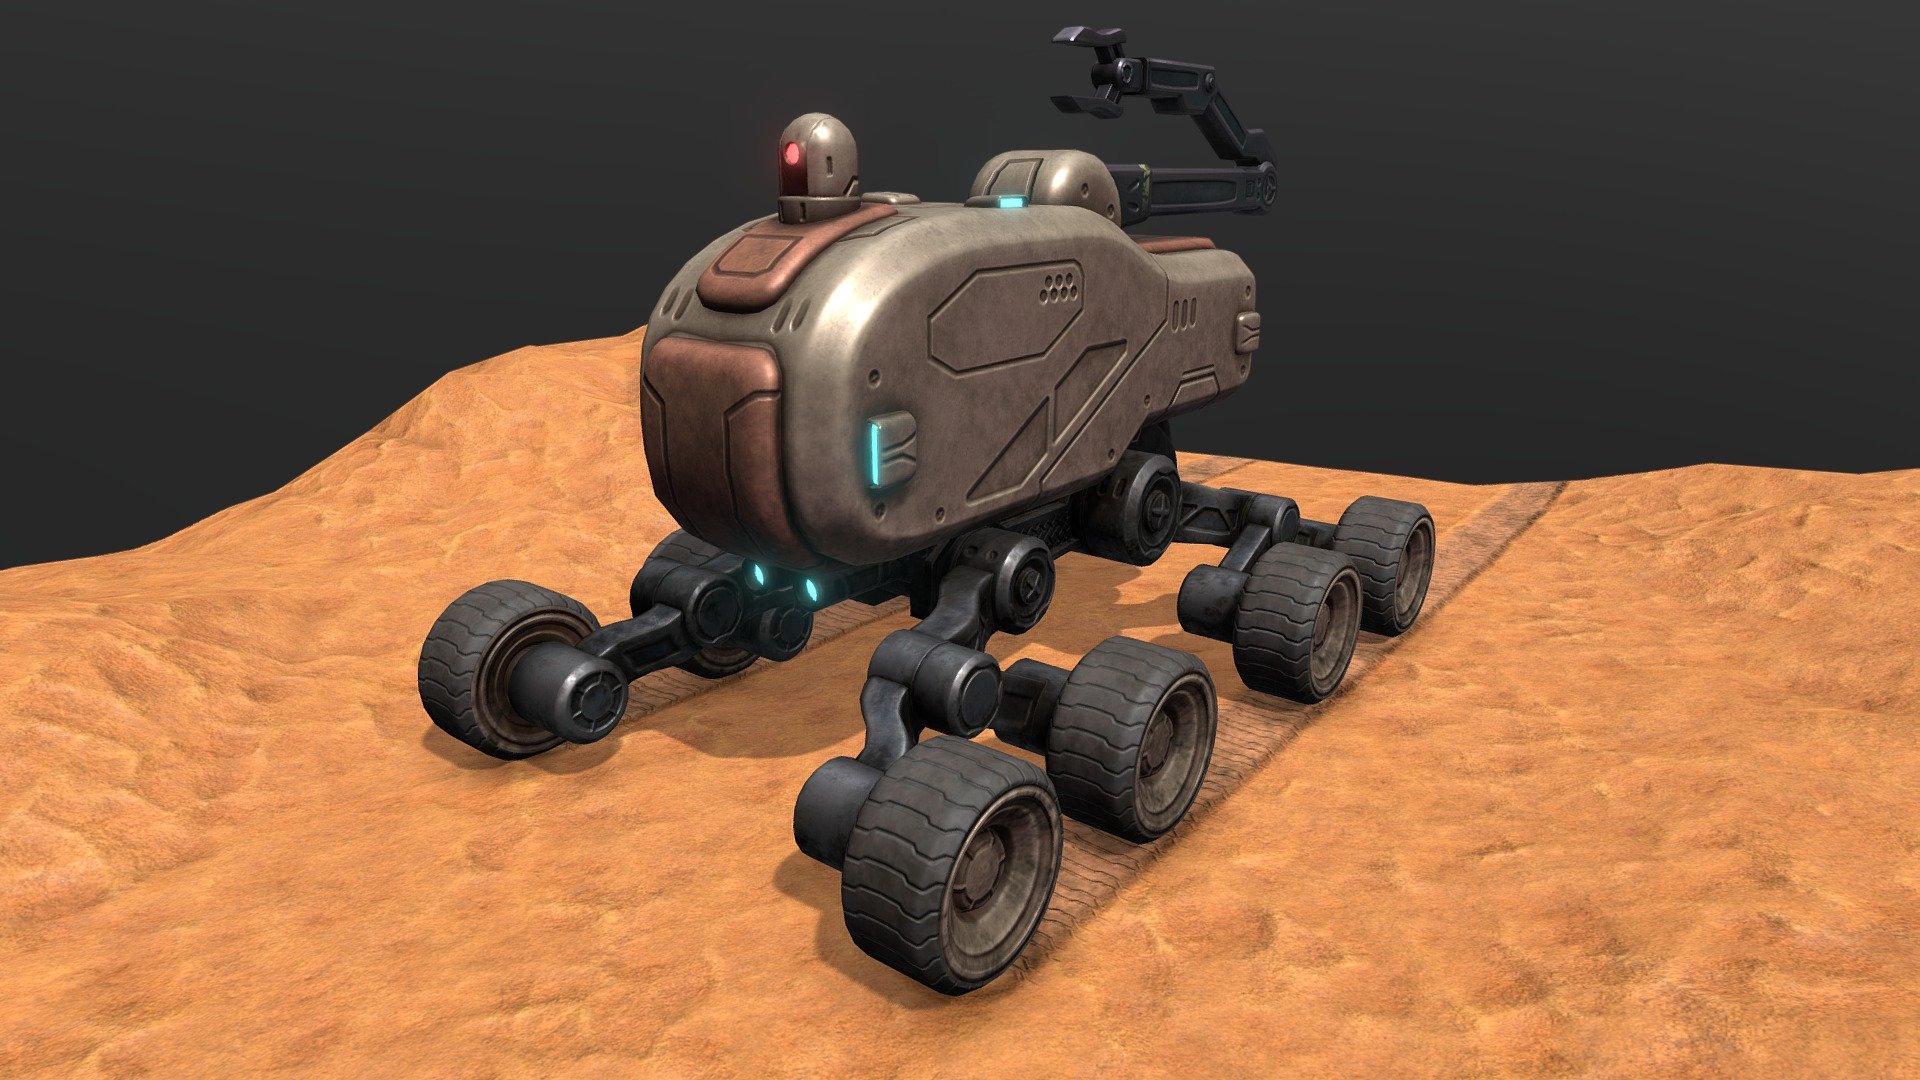 Sending people to remote planets can be dangerous. Instead, this Scorpion Rover can do surveillance and surface analysis without risking any human lives. It uses an 8x8 wheel driving system, so it stays in control even in uneven terrain.
Original concept by Dimitry Popov 3d model